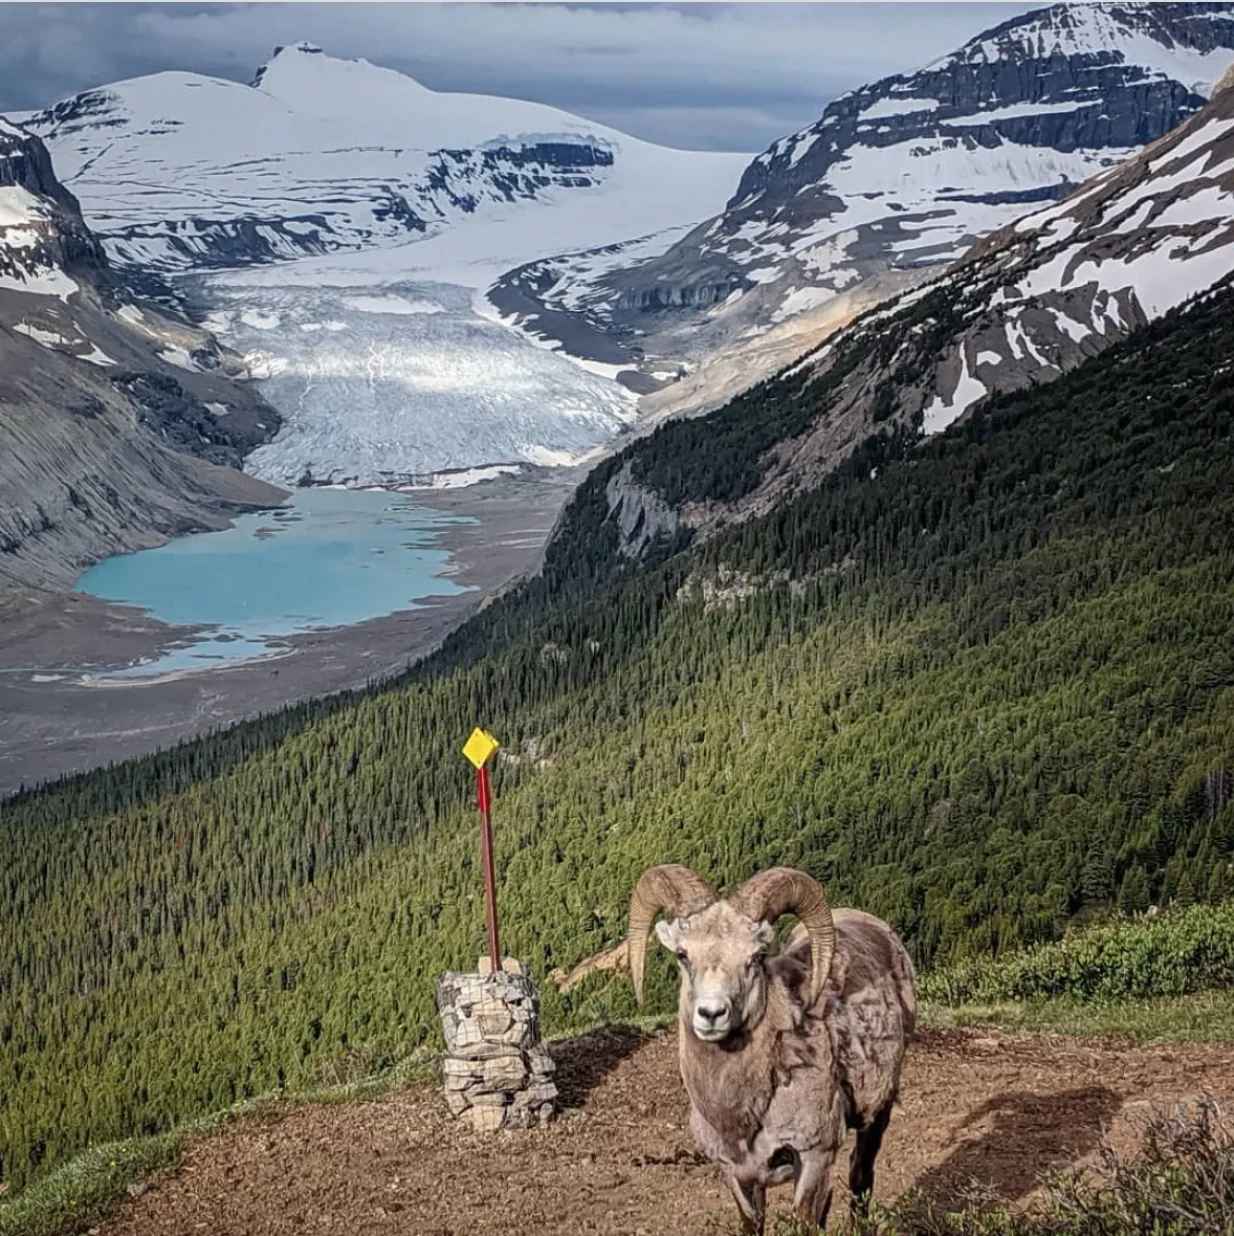 The Saskatchewan Glacier, part of the Columbia Icefields in Banff National Park, is the headwaters of the North Saskatchewan River. (Submitted by Kyle Schole/CBC)